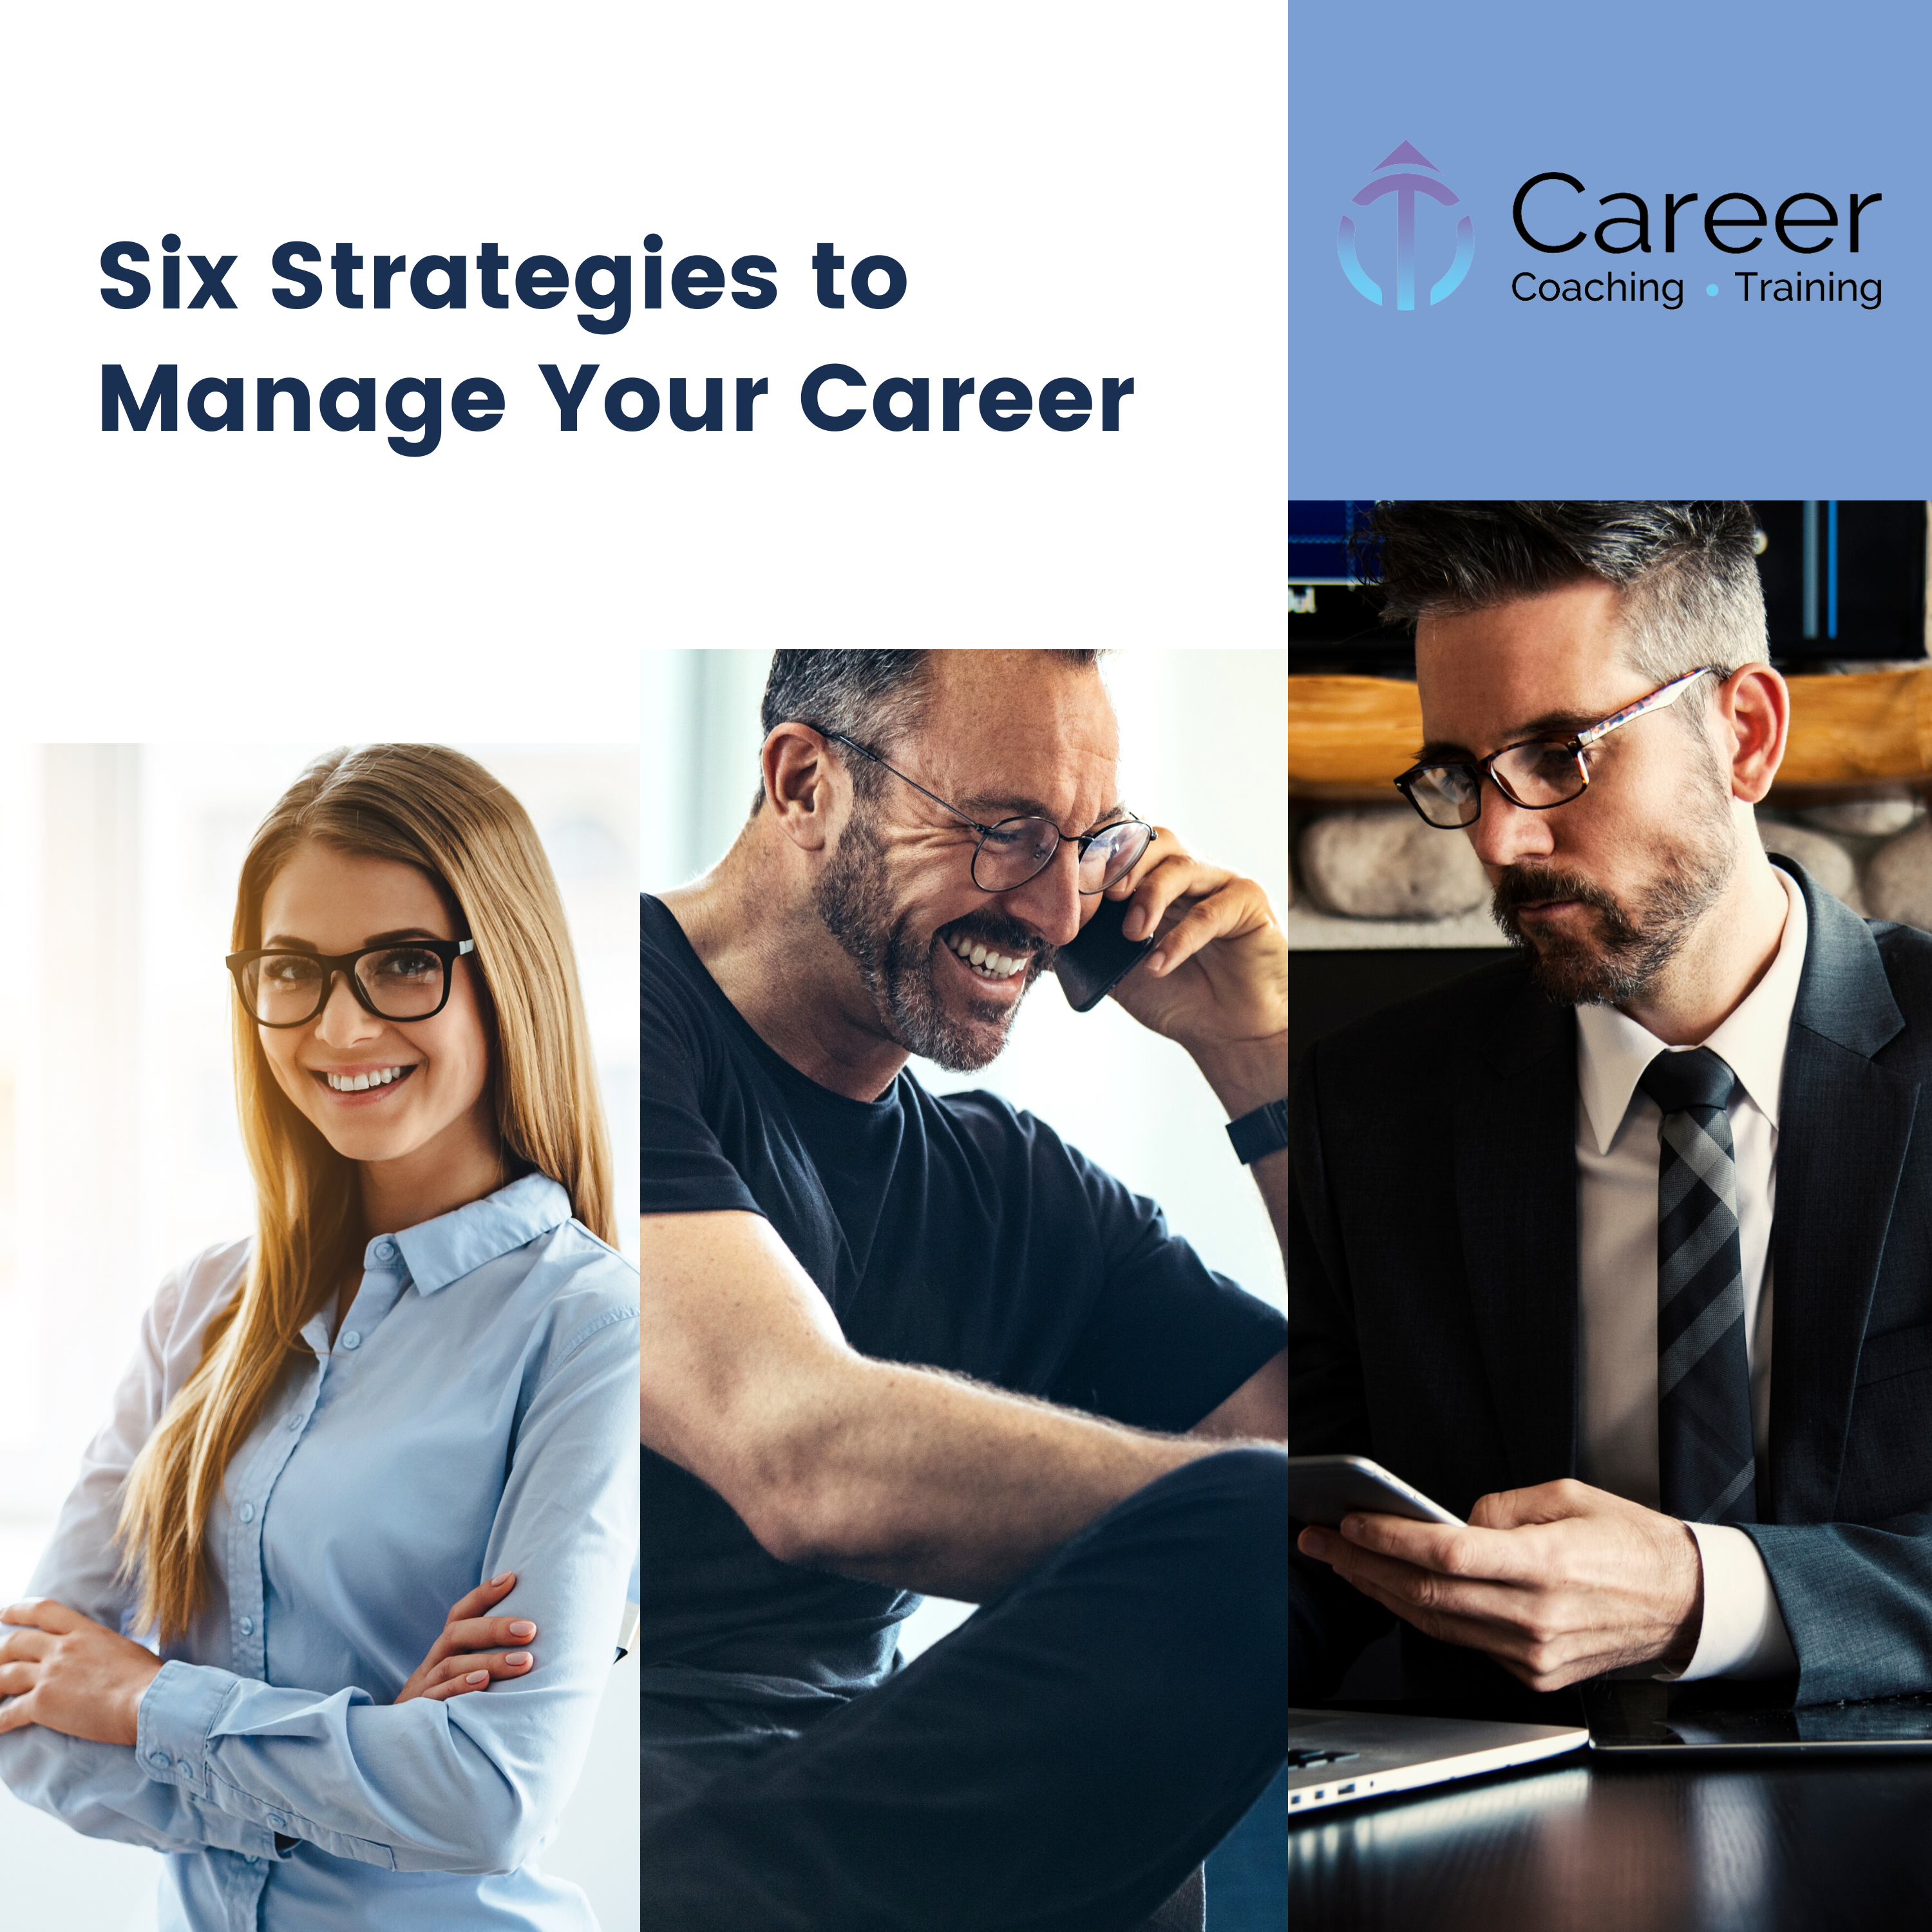 Six Strategies to Manage Your Career